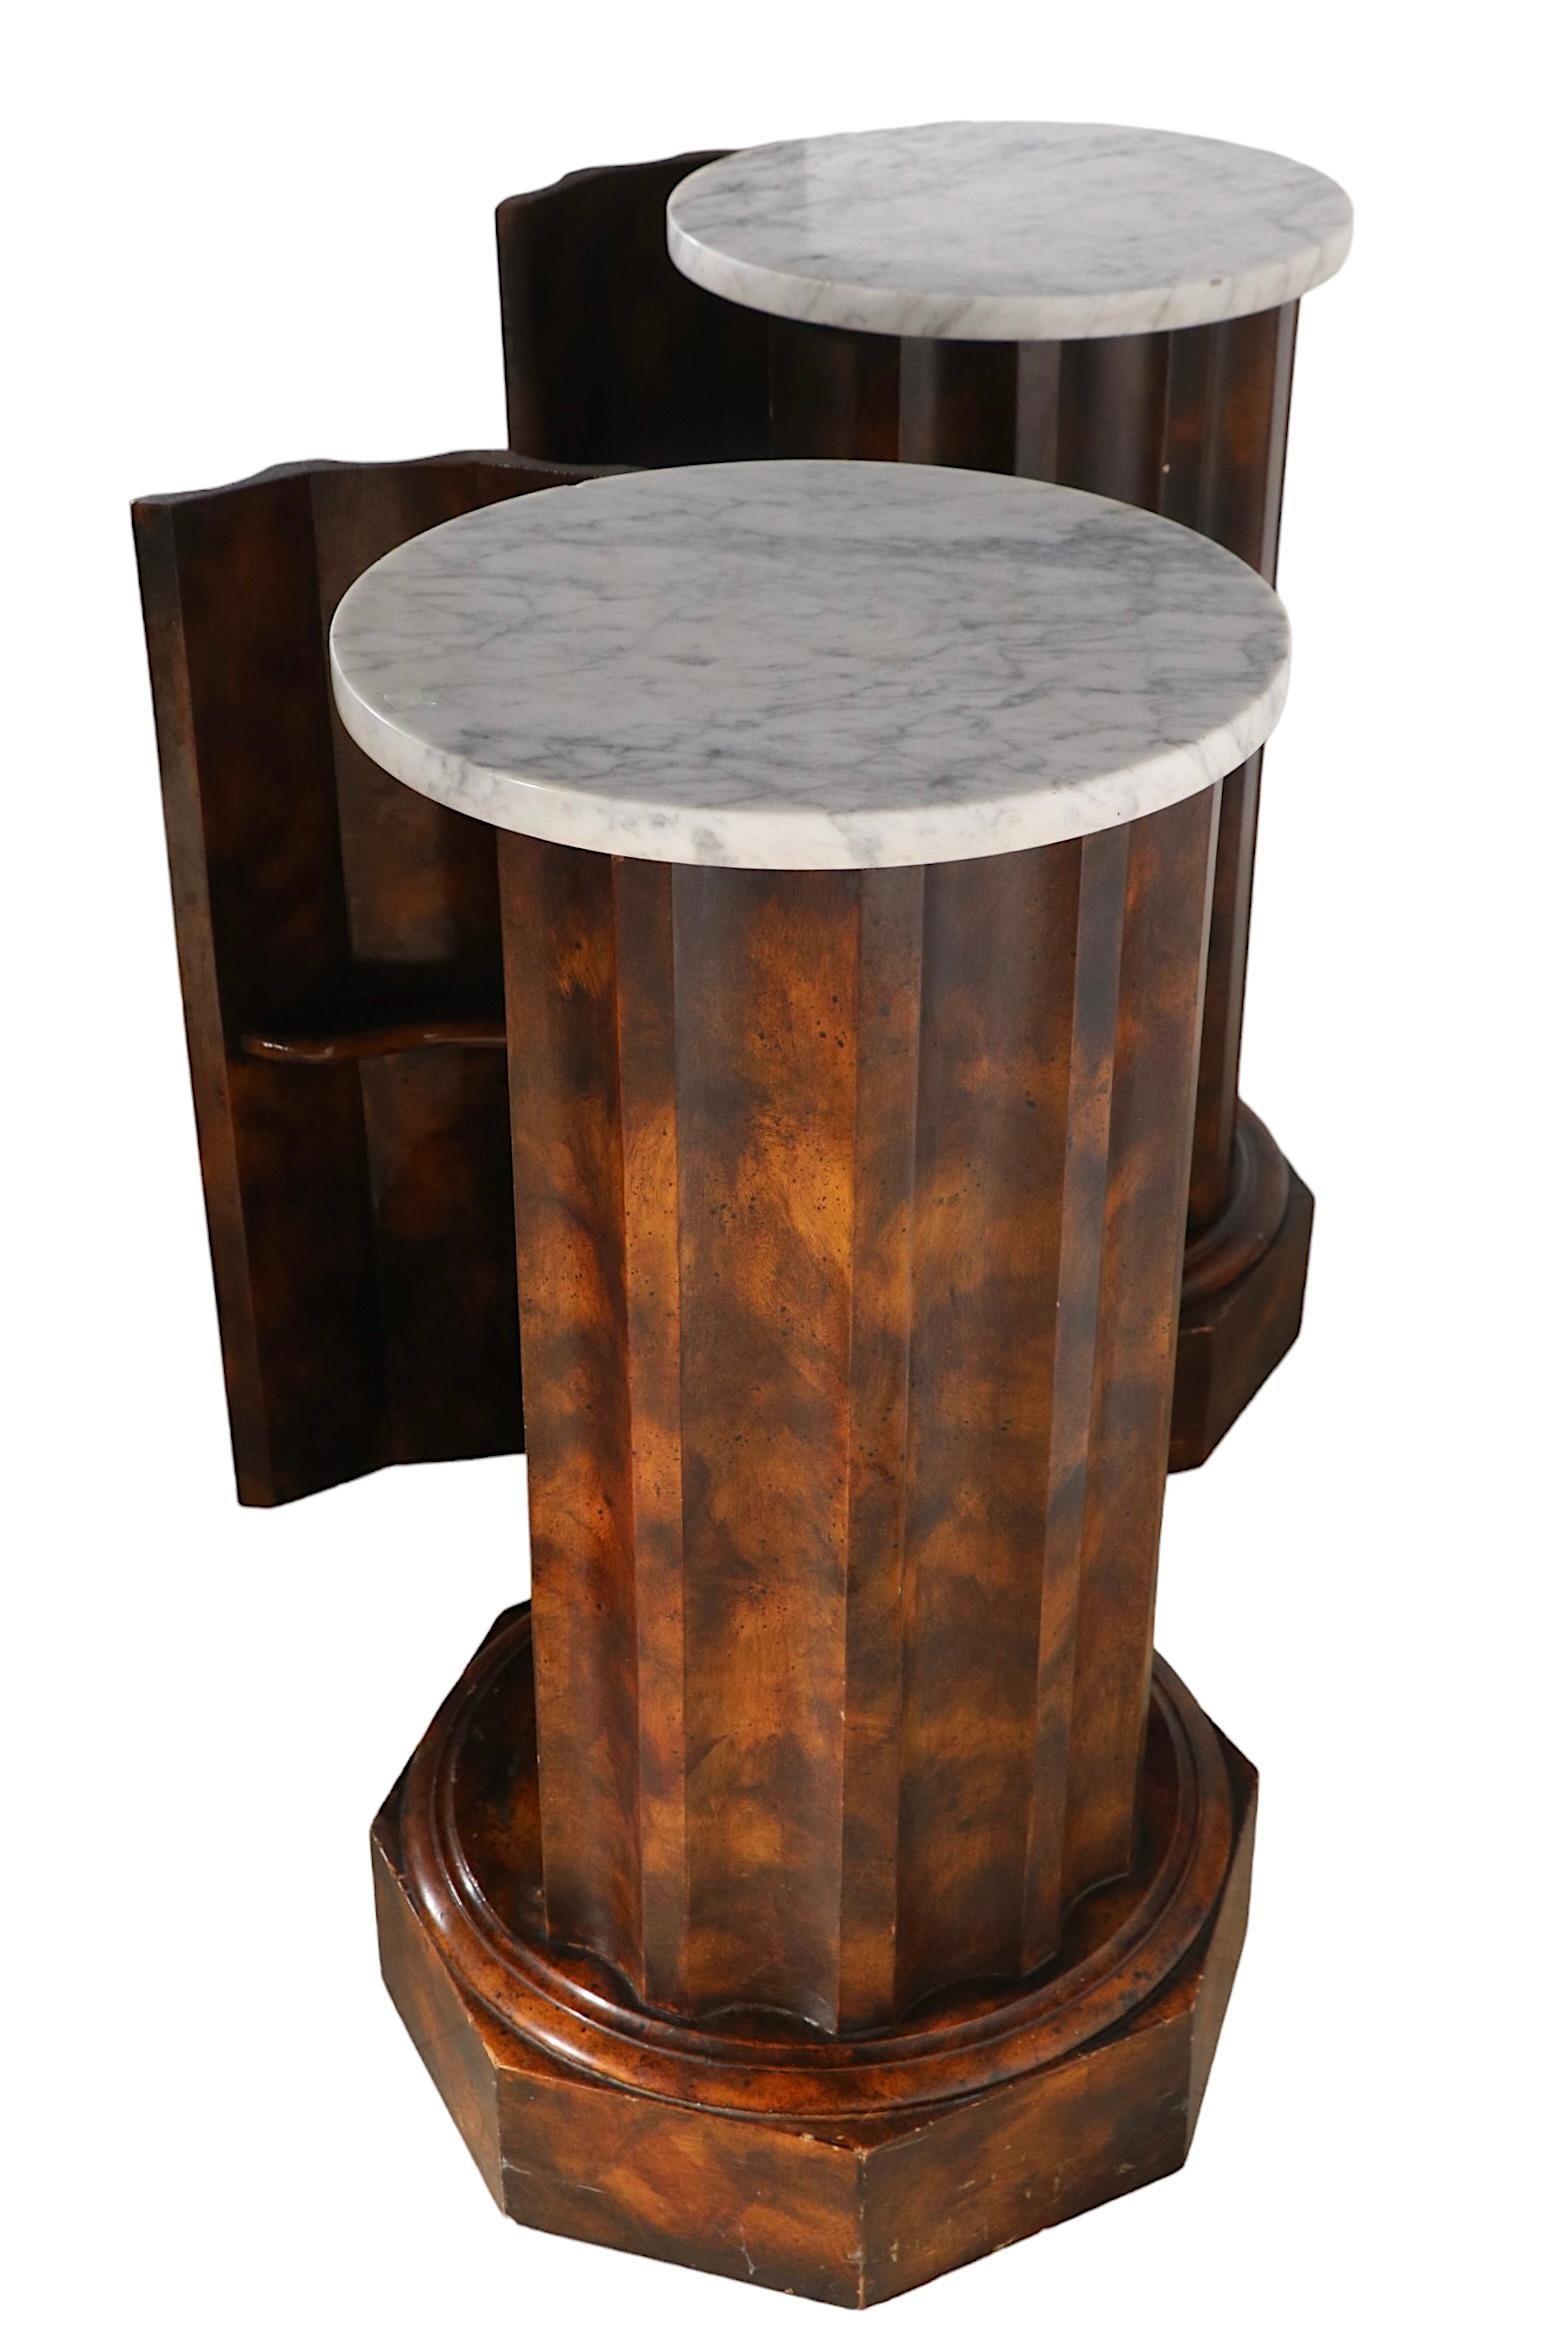 Pr.unusual half column pedestals, in faux tortoise shell finish, with marble tops. The columns open to reveal storage with an interior shelf. Both are structurally sound and sturdy, both show some cosmetic wear to the finish, normal and consistent